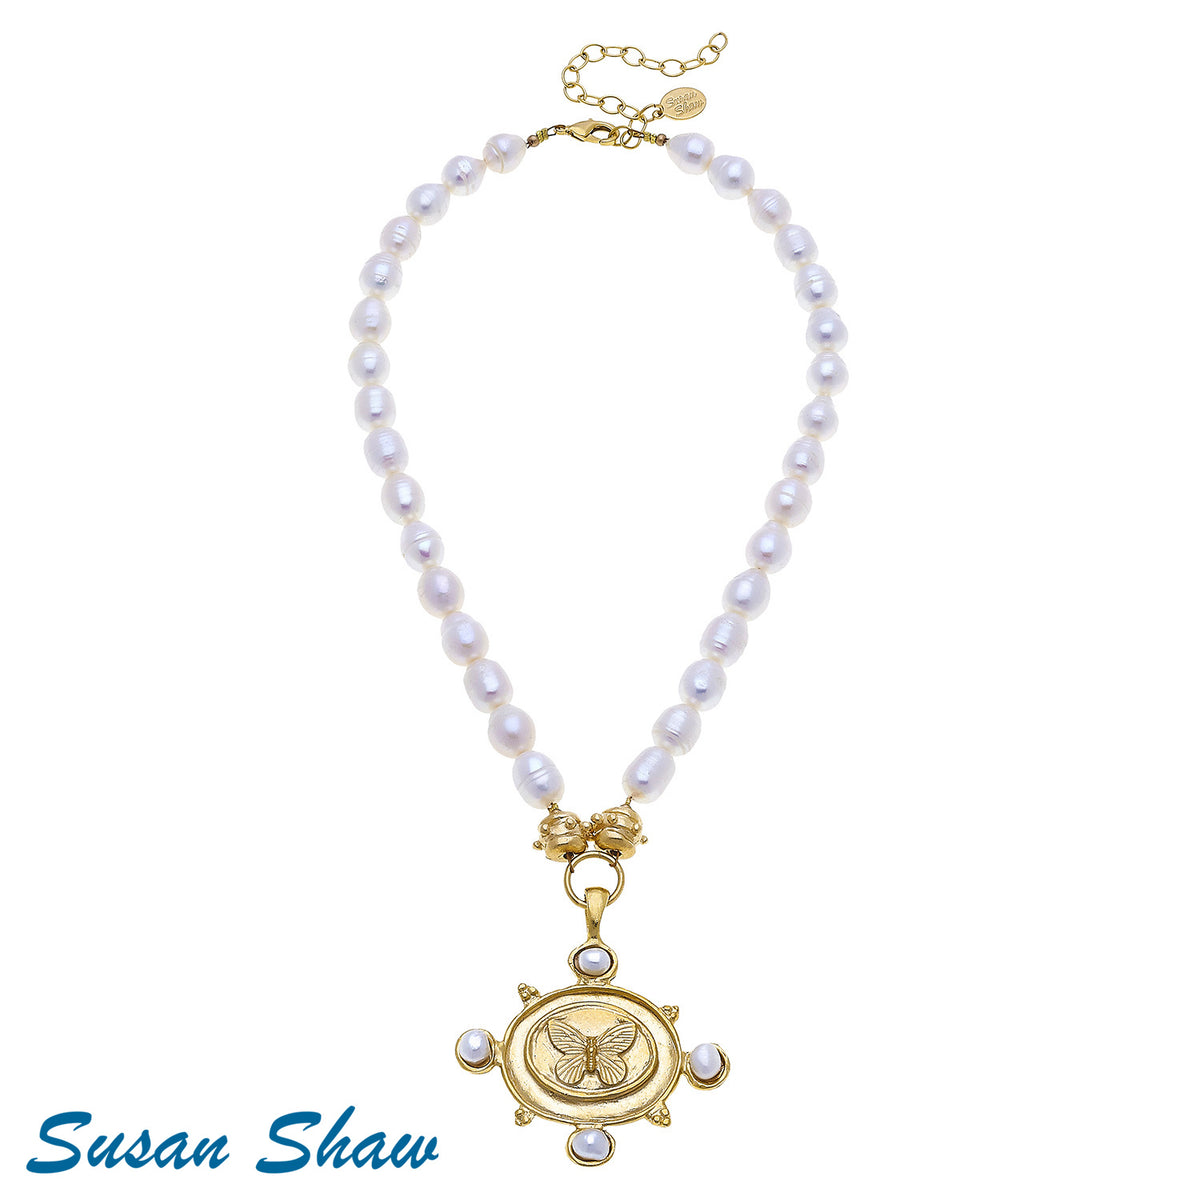 SUSAN SHAW Gold Oval Butterfly on Genuine Freshwater Pearl Necklace